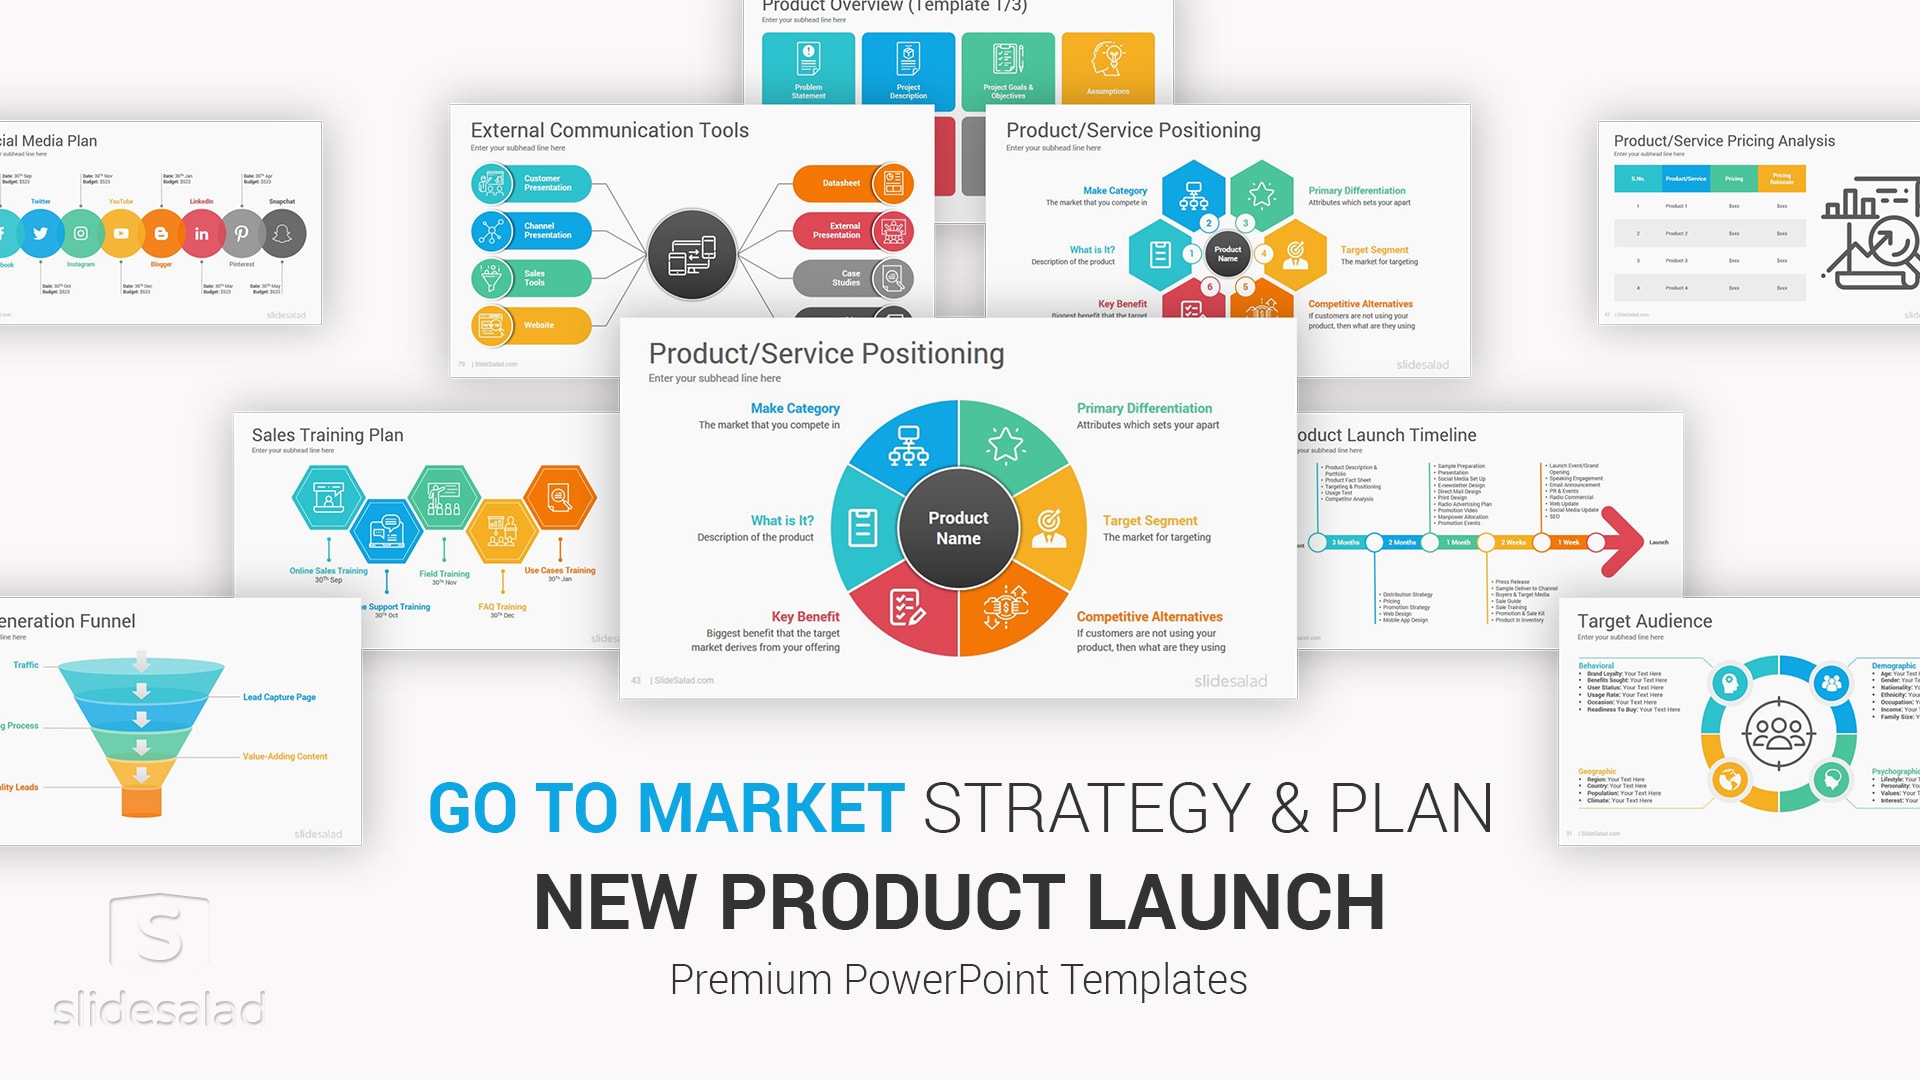 New Product Launch Go To Market Plan and Strategy PowerPoint Template